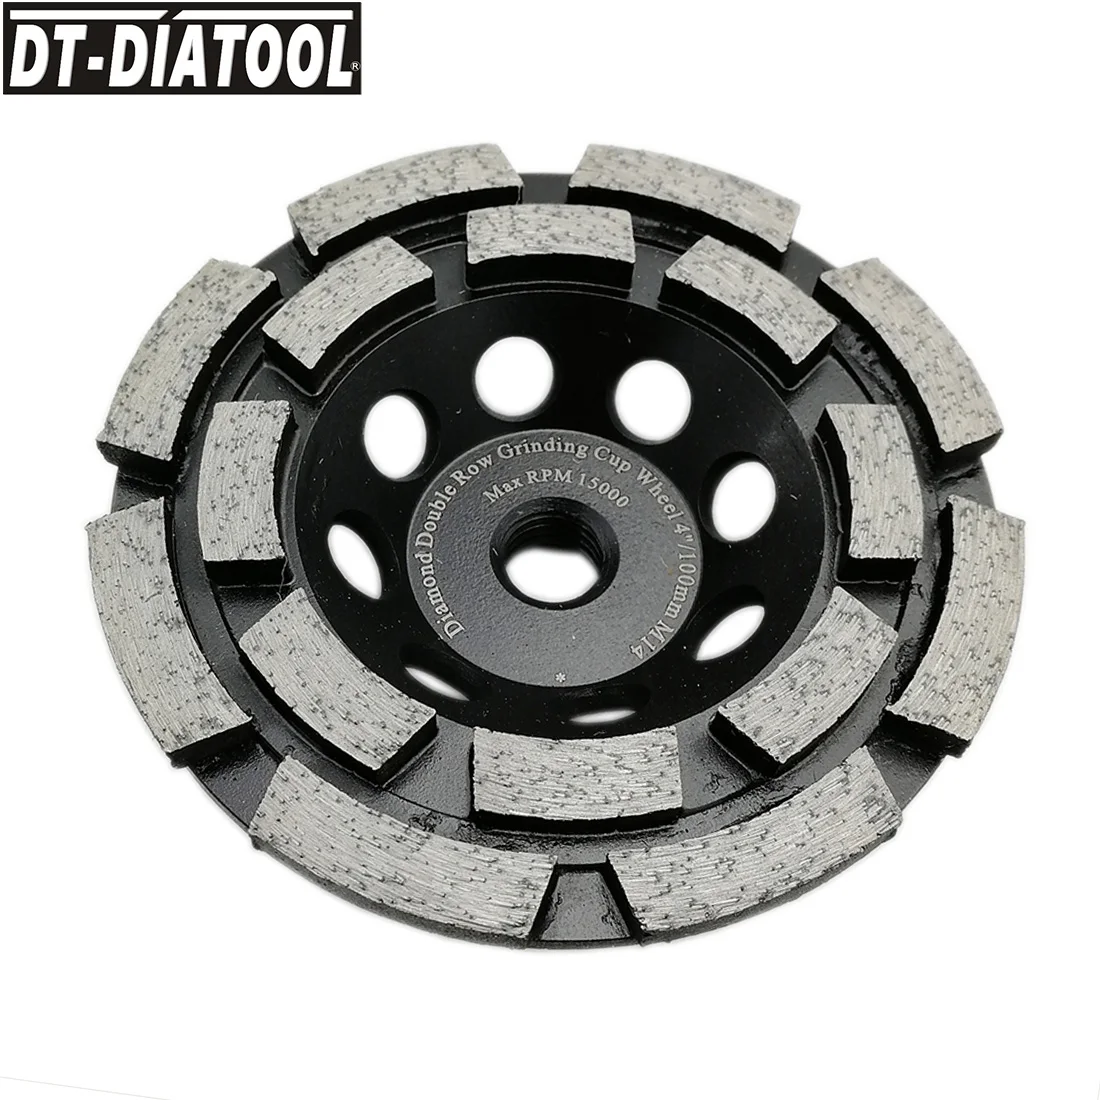 

DT-DIATOOL 1pc Dia100mm Diamond Double Row Cup Grinding Wheel 4inch for Concrete Brick Hard Stone Granite Marble with M14 thread